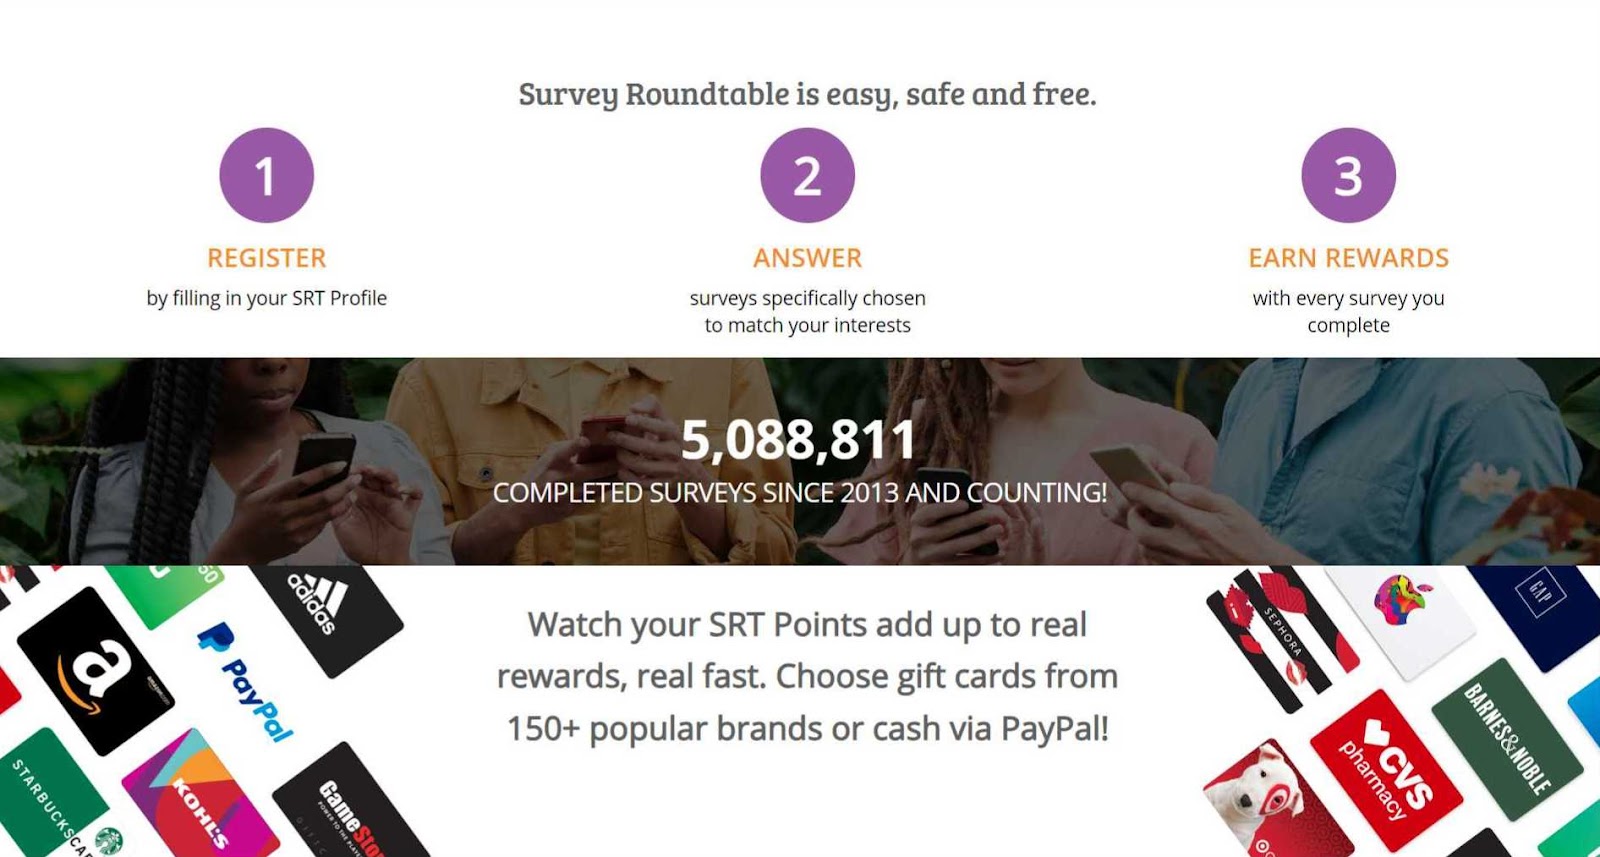 The Survey Roundtable website showing gift cards you can earn by taking surveys, including Target, Amazon, CVS, and Adidas, or opt for cash via PayPal.